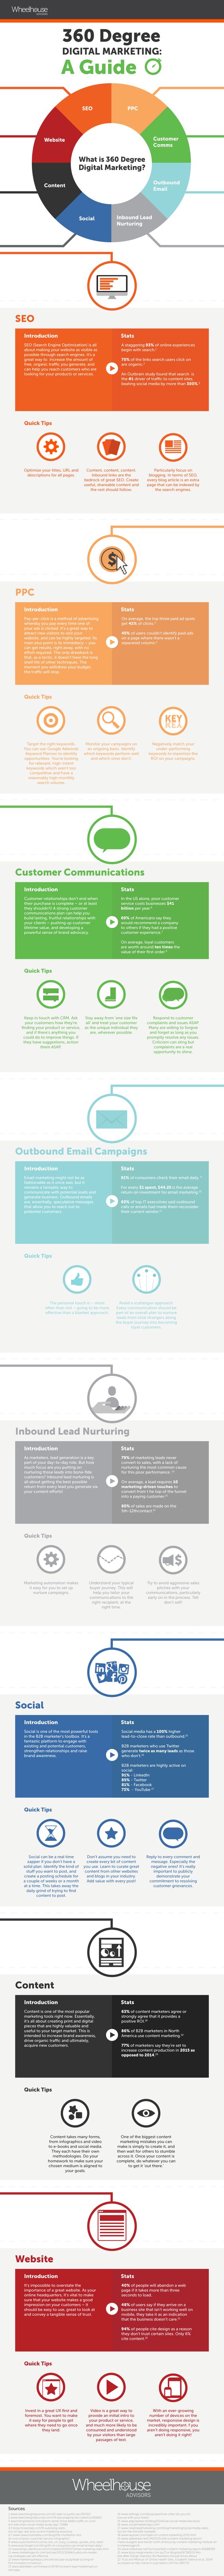 Infographic Of The Week: A Guide To 360 Degree Digital Marketing